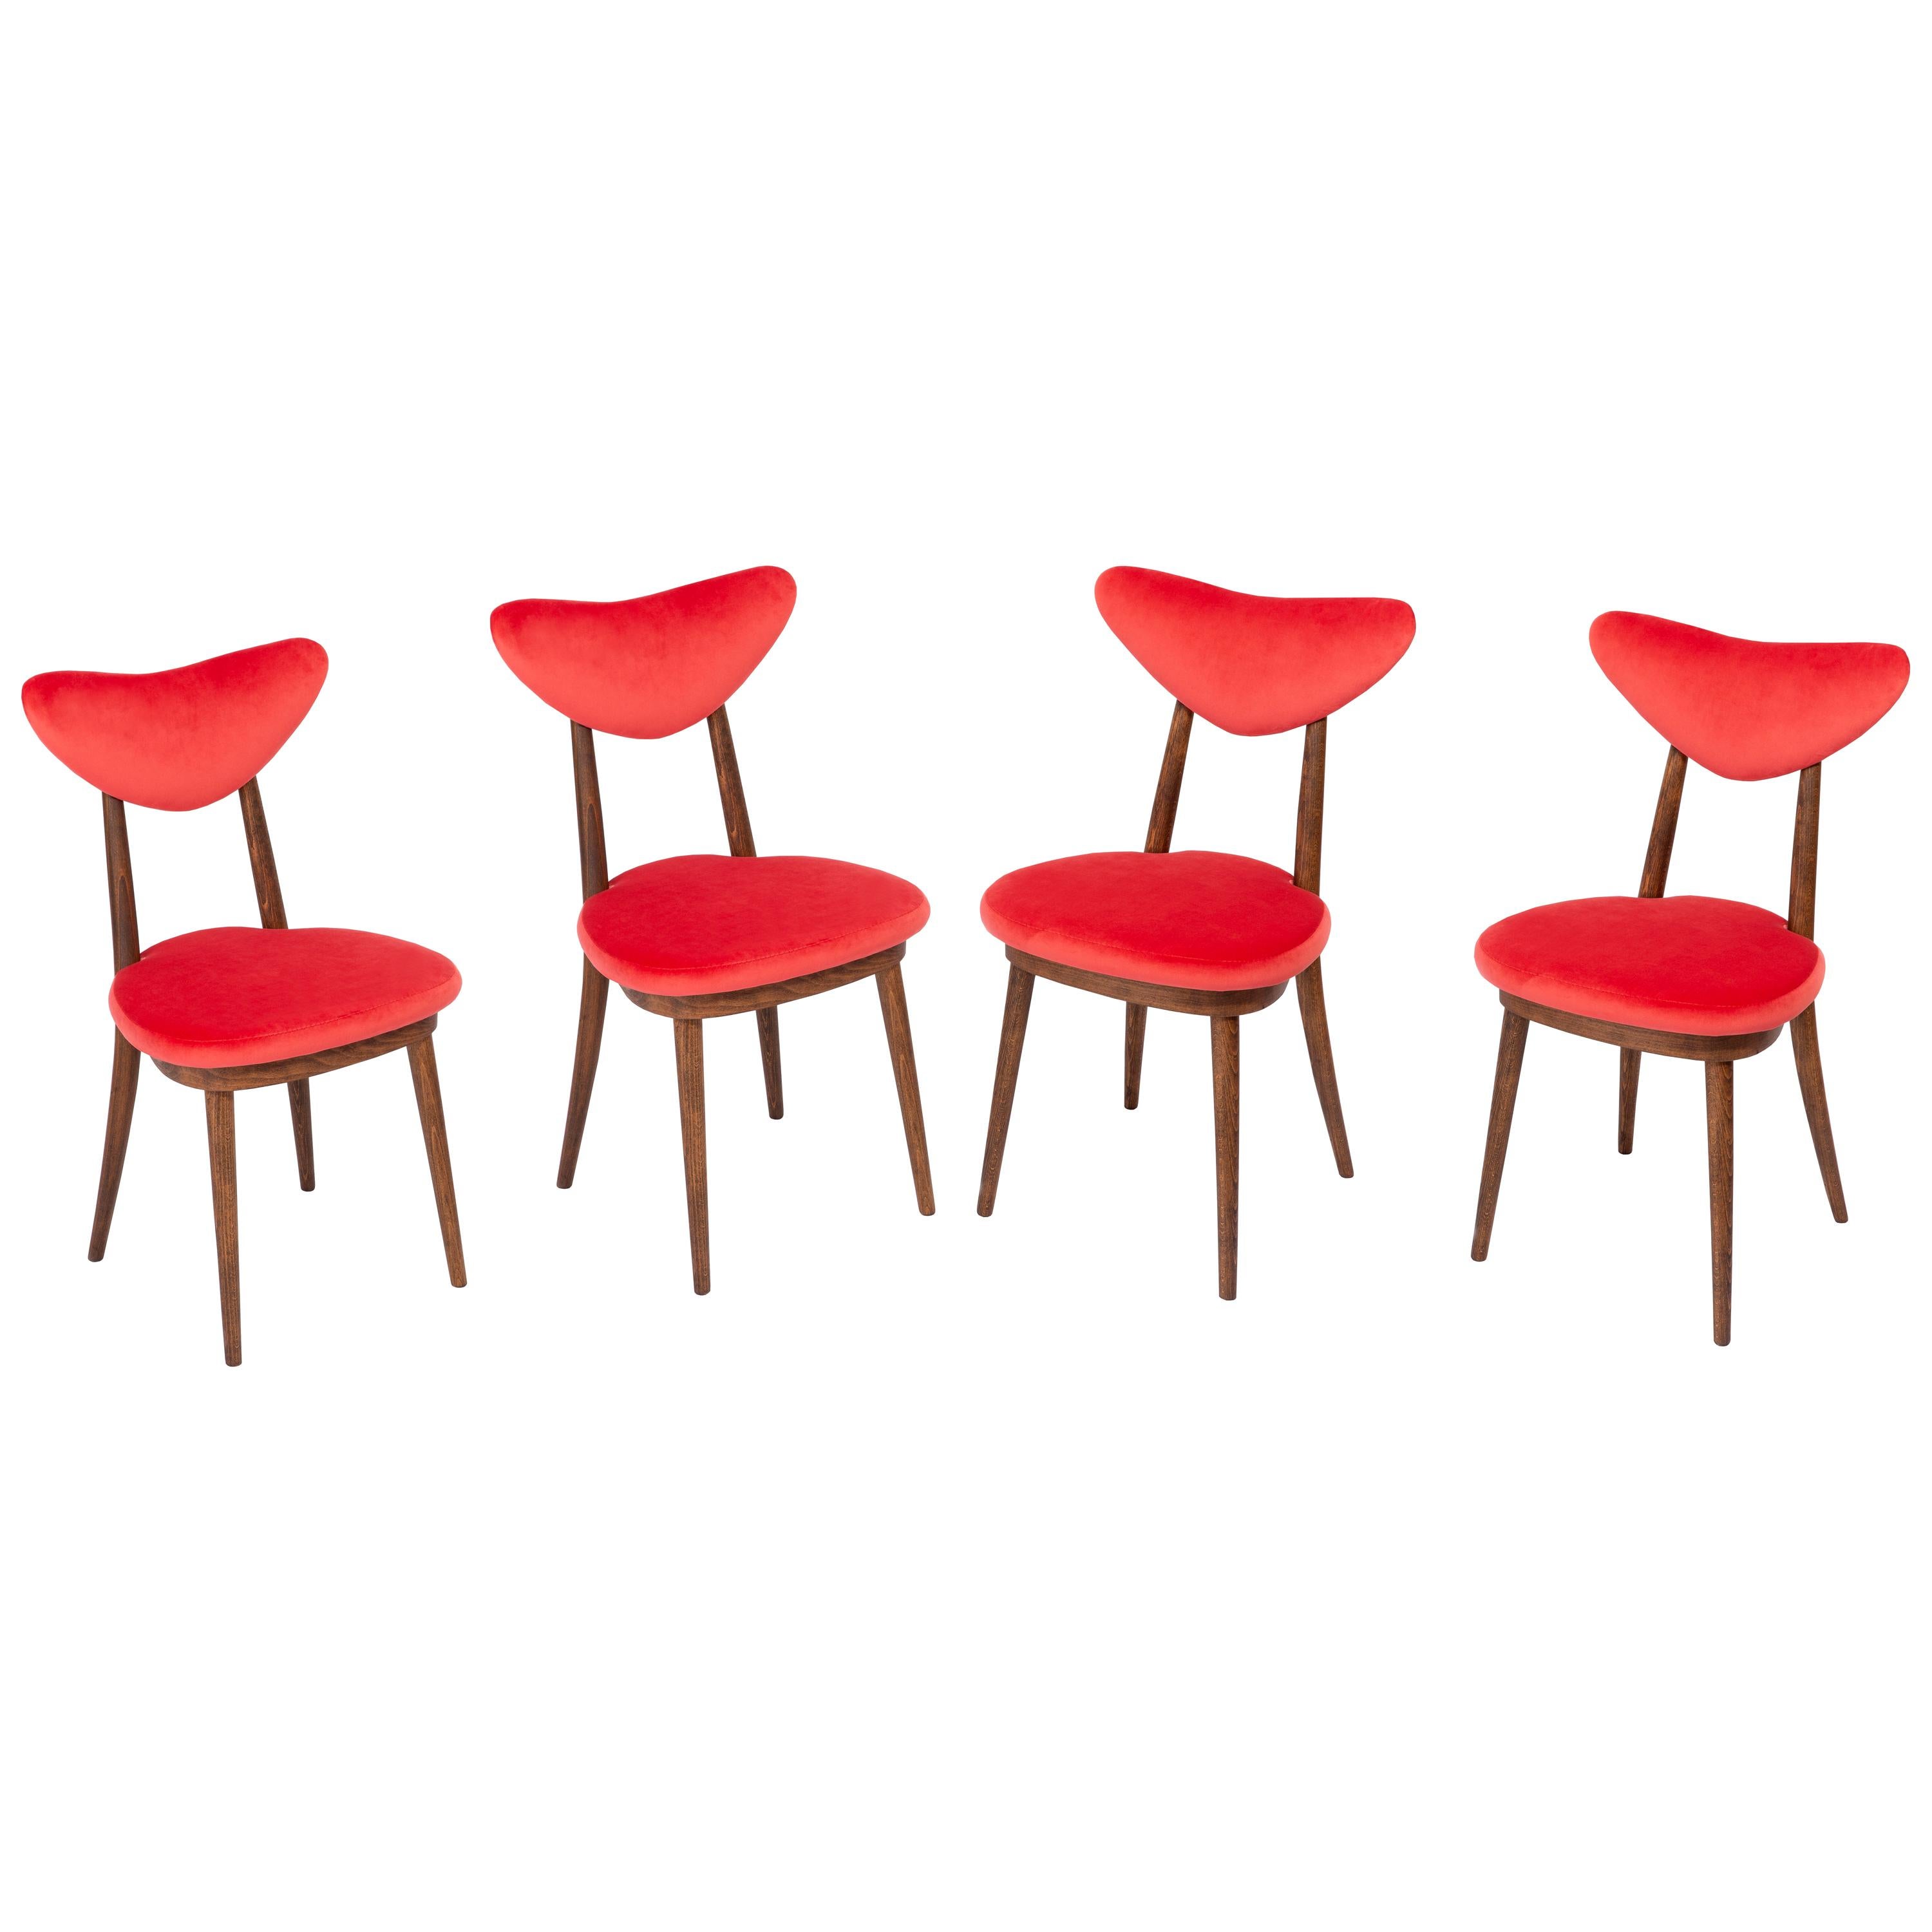 Set of Four Red Heart Chairs, Poland, 1960s For Sale